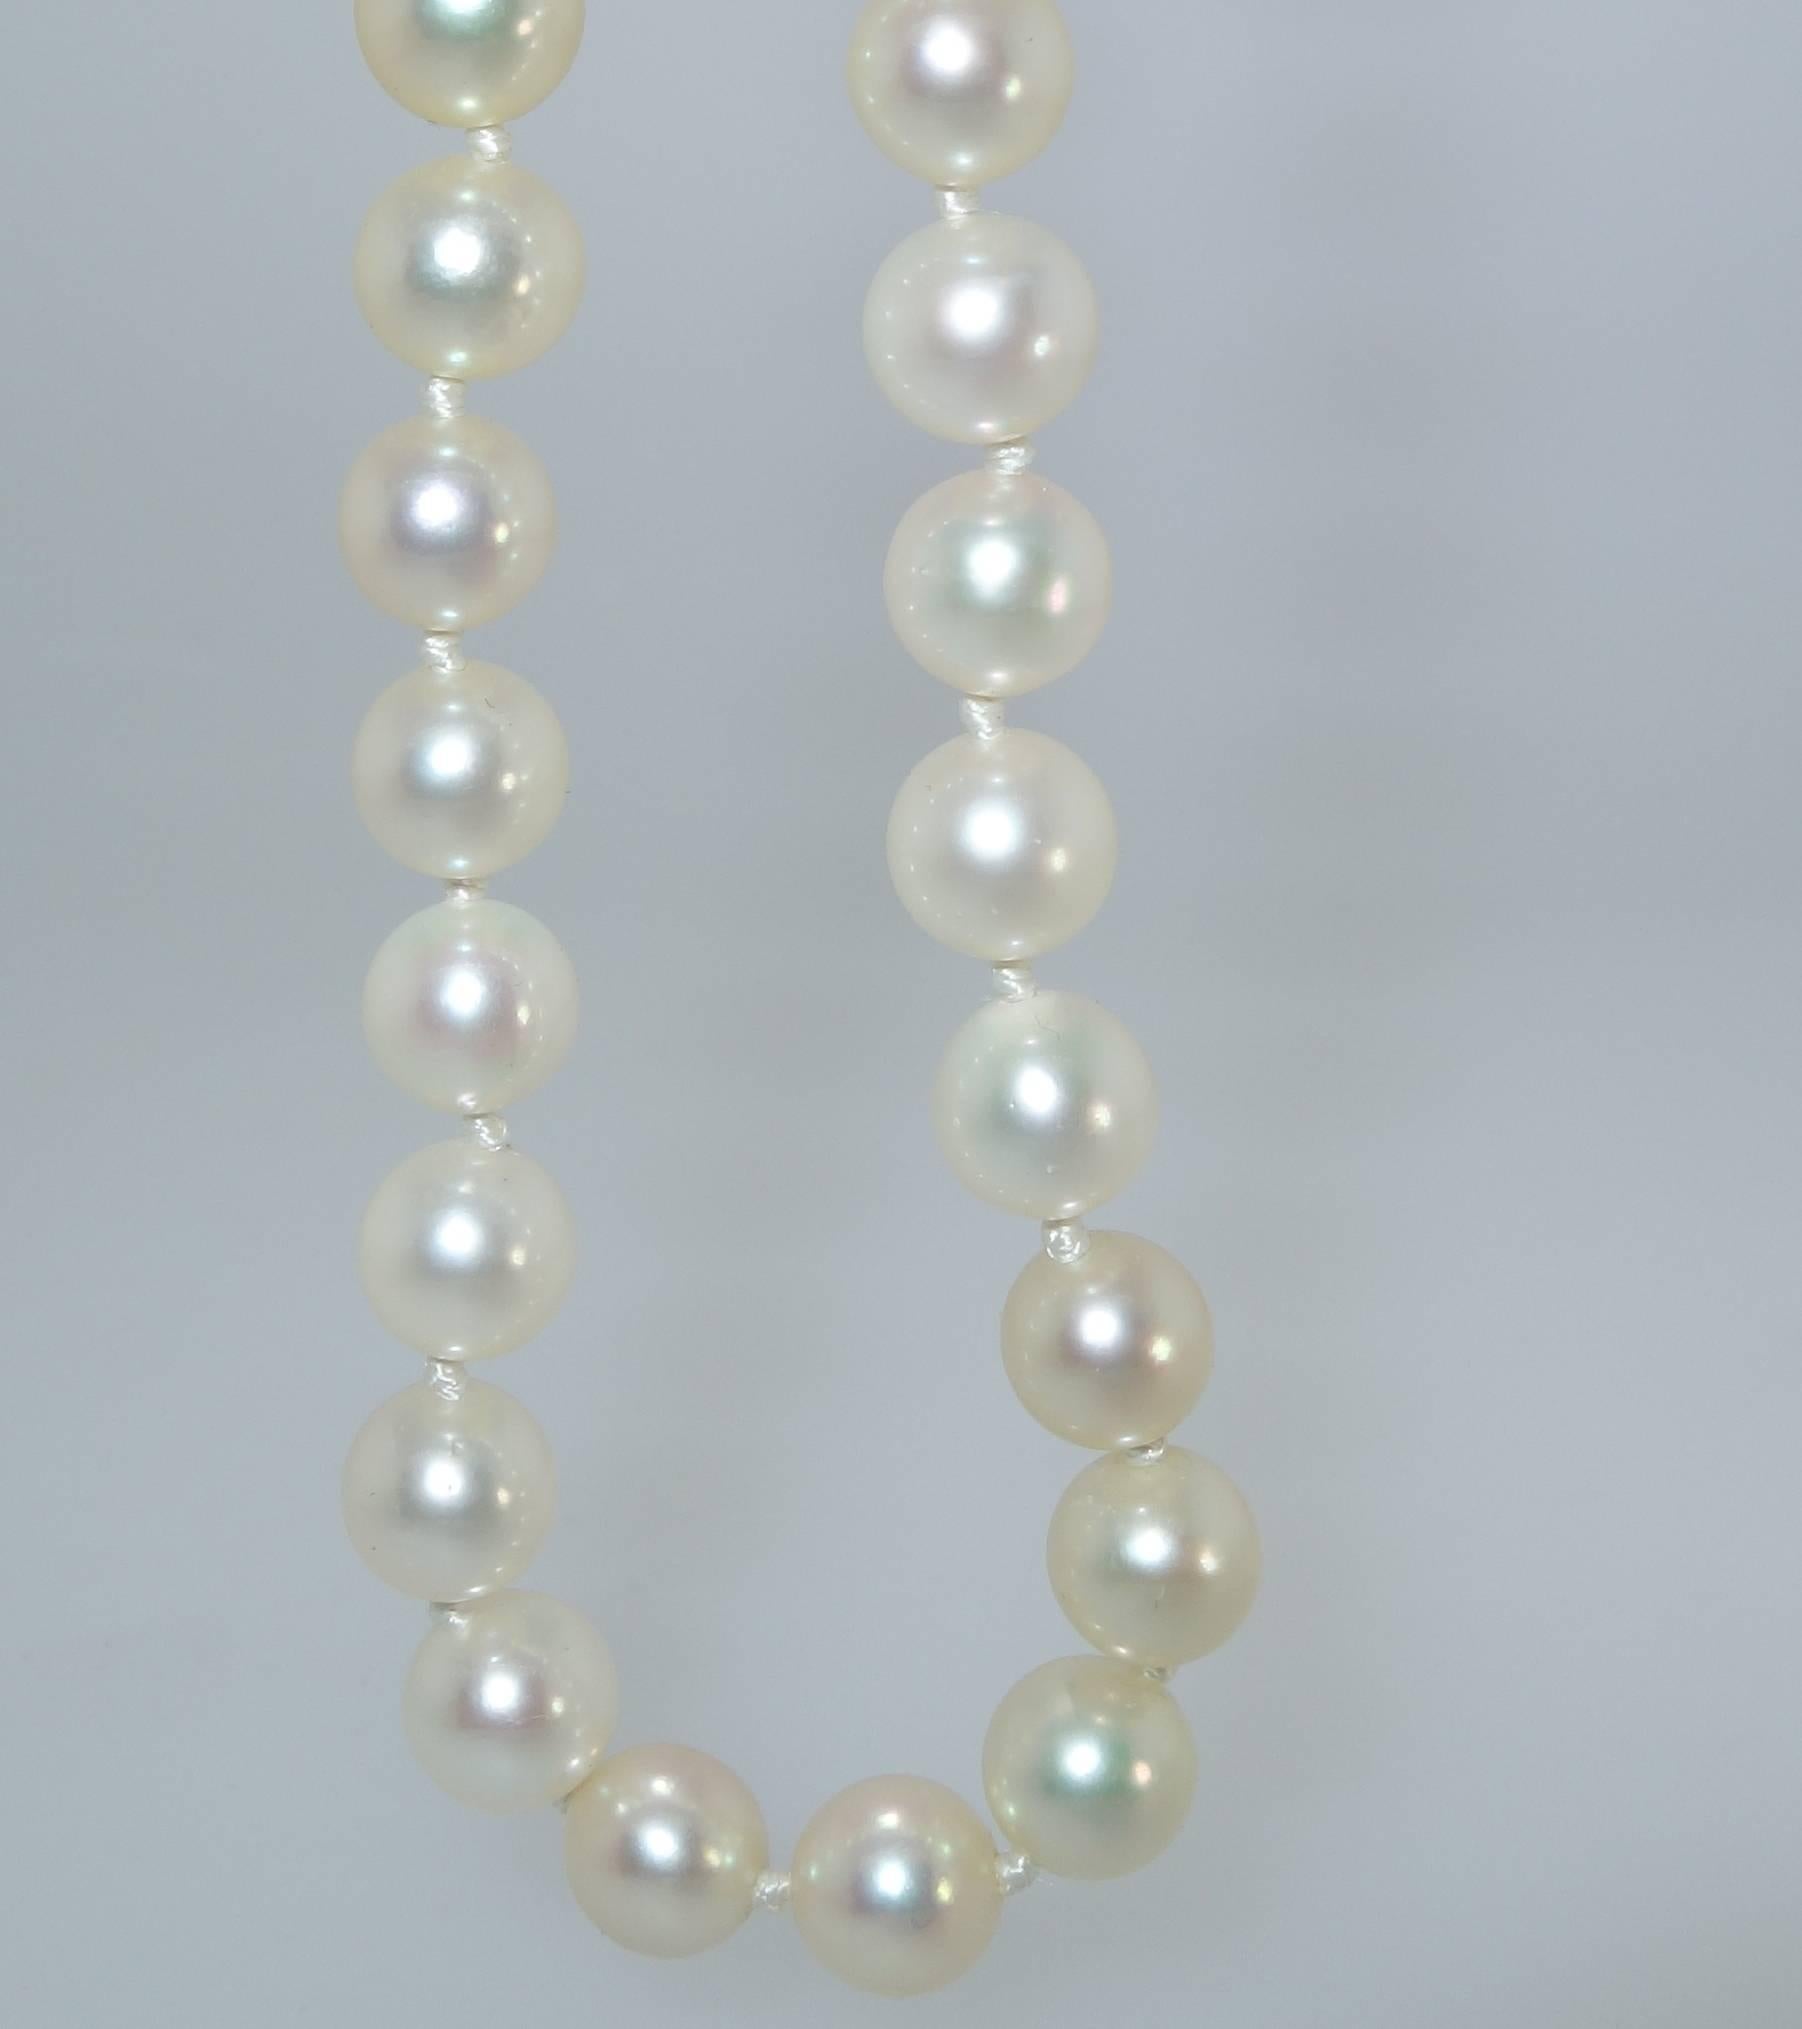 The 18K white gold clasp with small diamonds complete this 25 inch strand of fine cultured pearls ranging in size from 6.5 to 7.0 mm.  There are 78 round pearls which all display a fine depth of nacre which is why the pearls are so reflective and